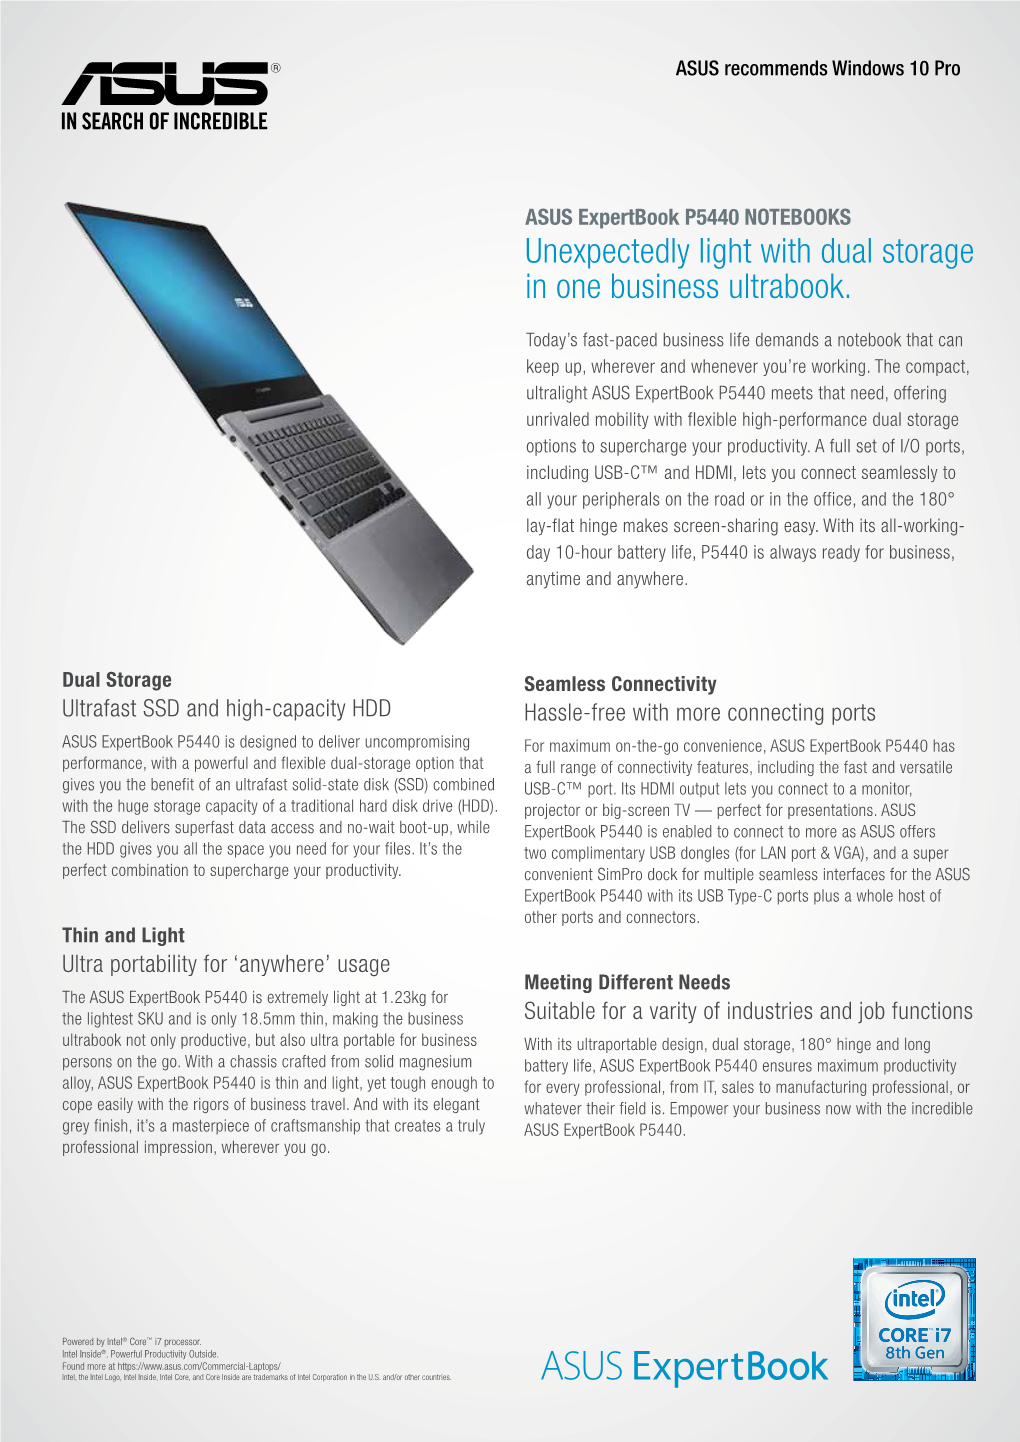 Unexpectedly Light with Dual Storage in One Business Ultrabook